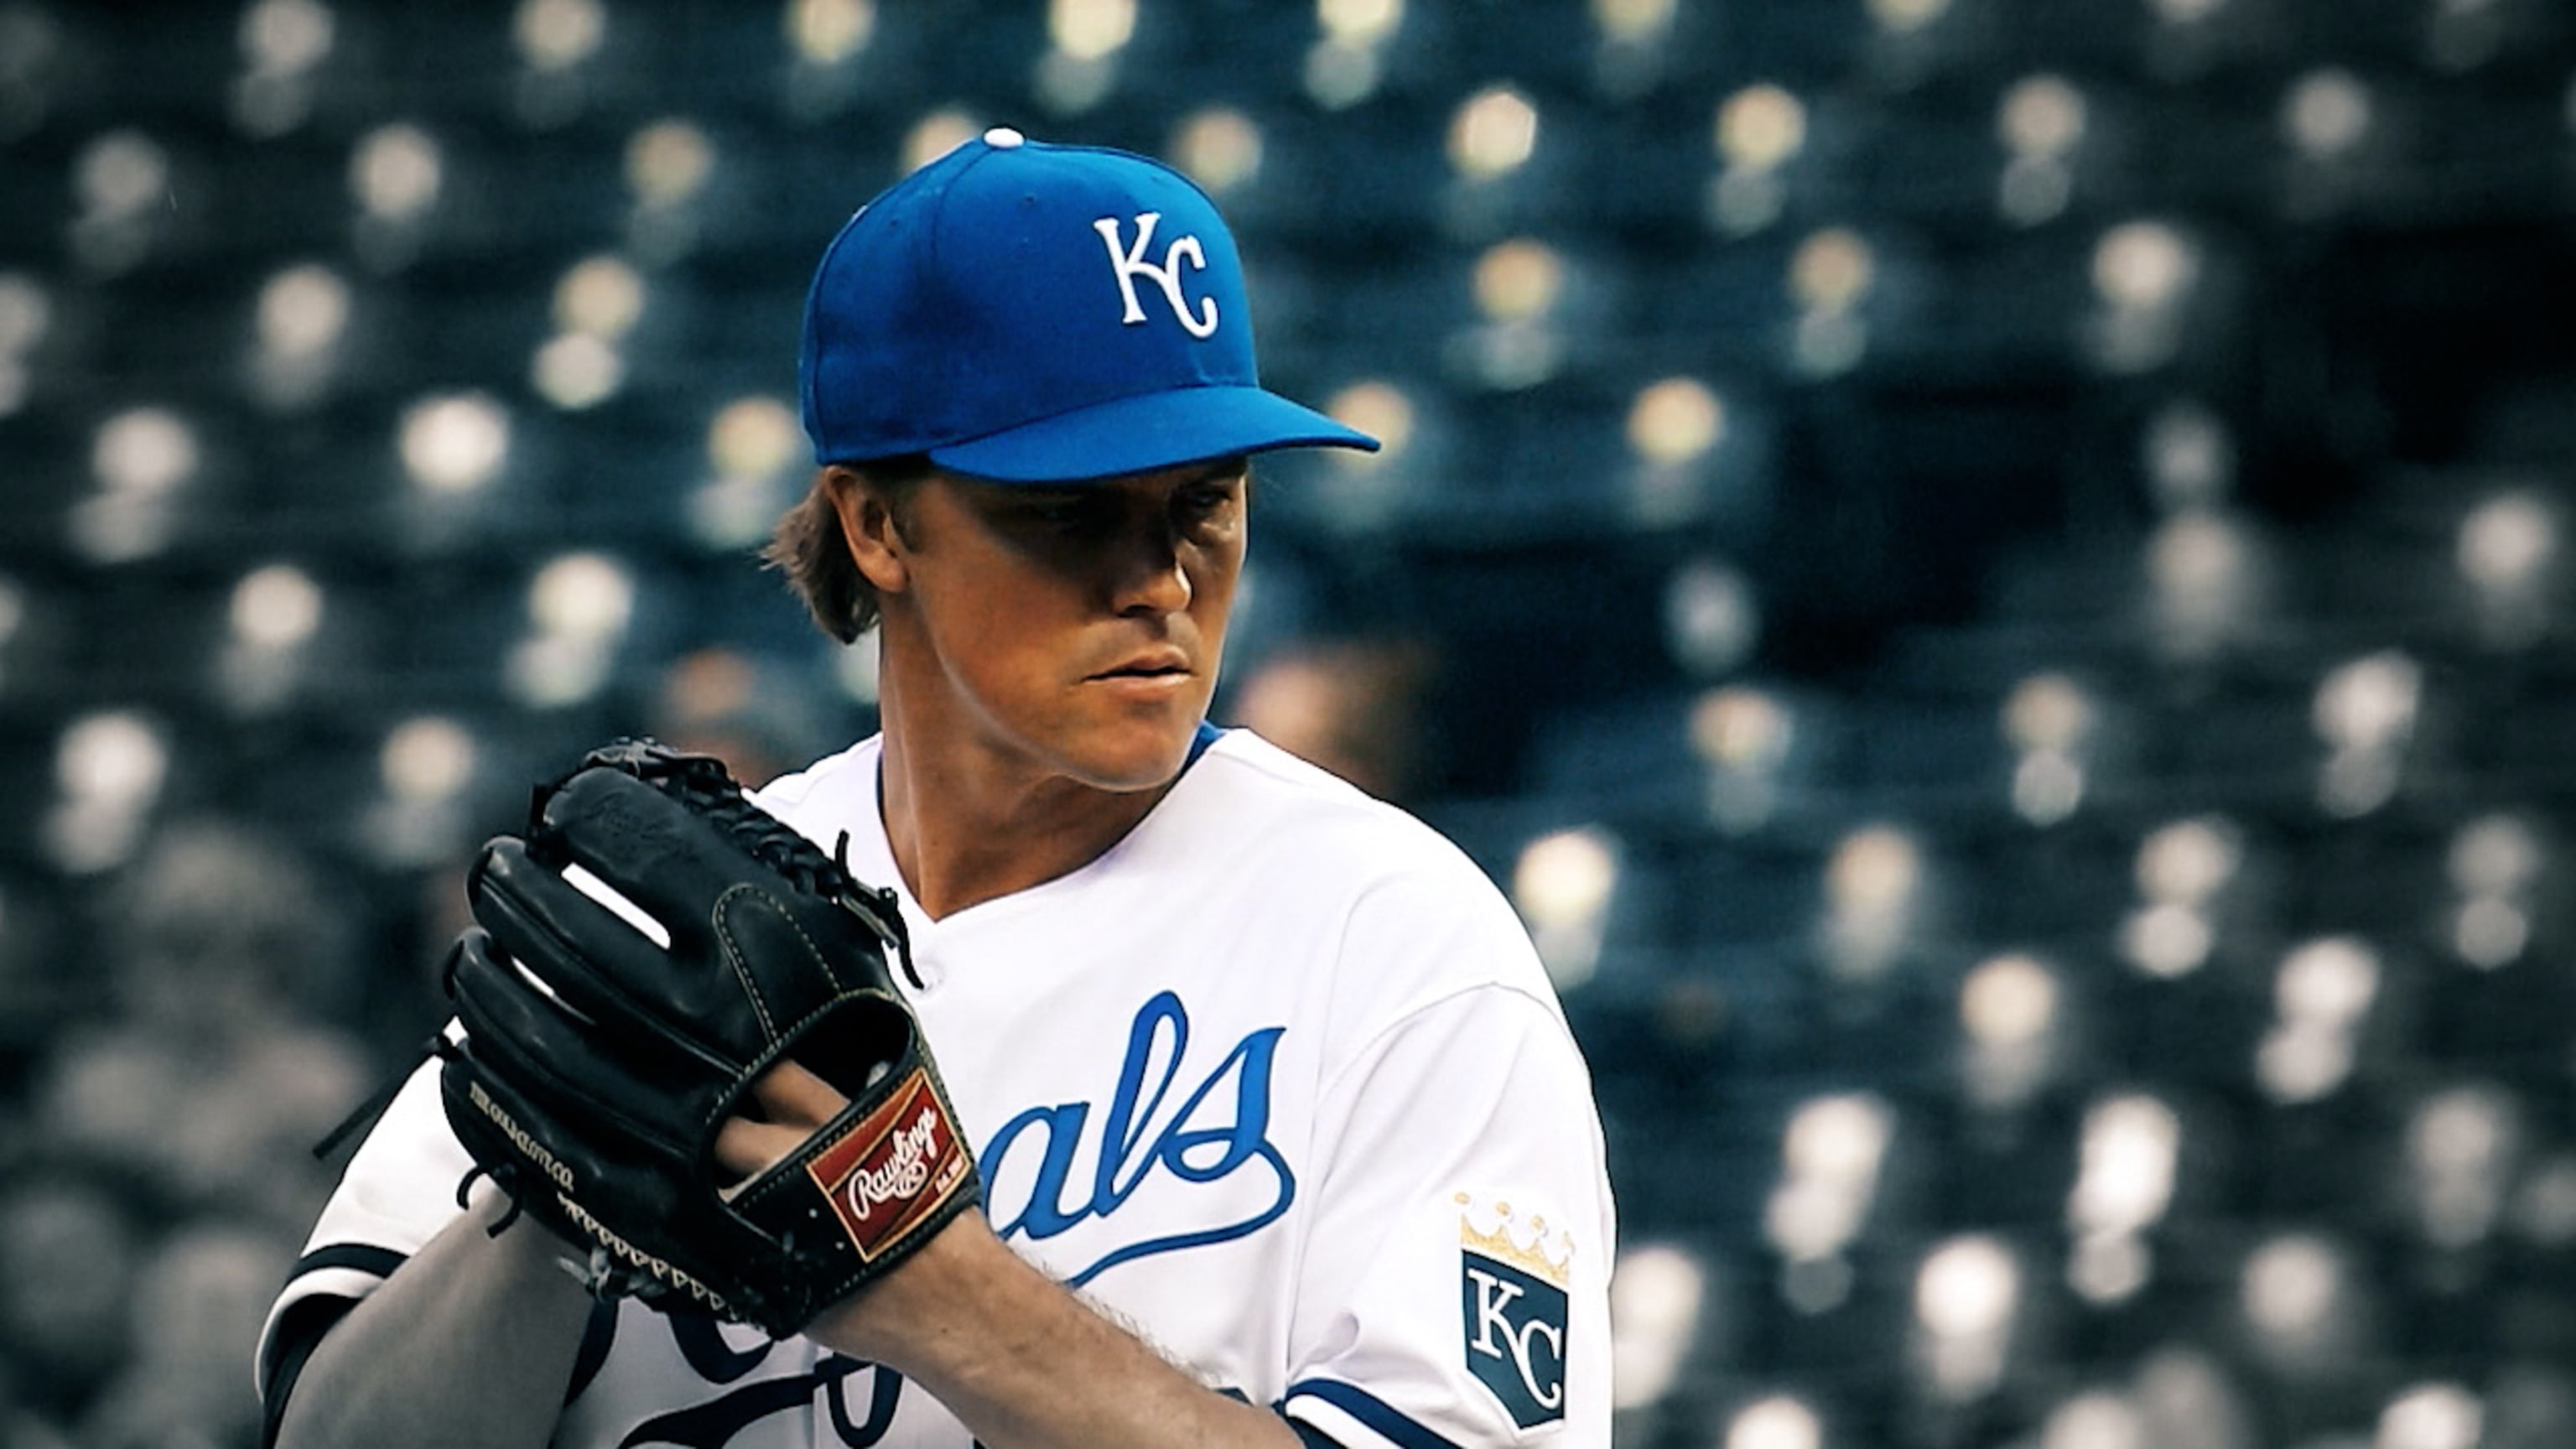 Zack Greinke Bet Royals Rookie That He Wouldn't Hit Home Run This Season -  Fastball